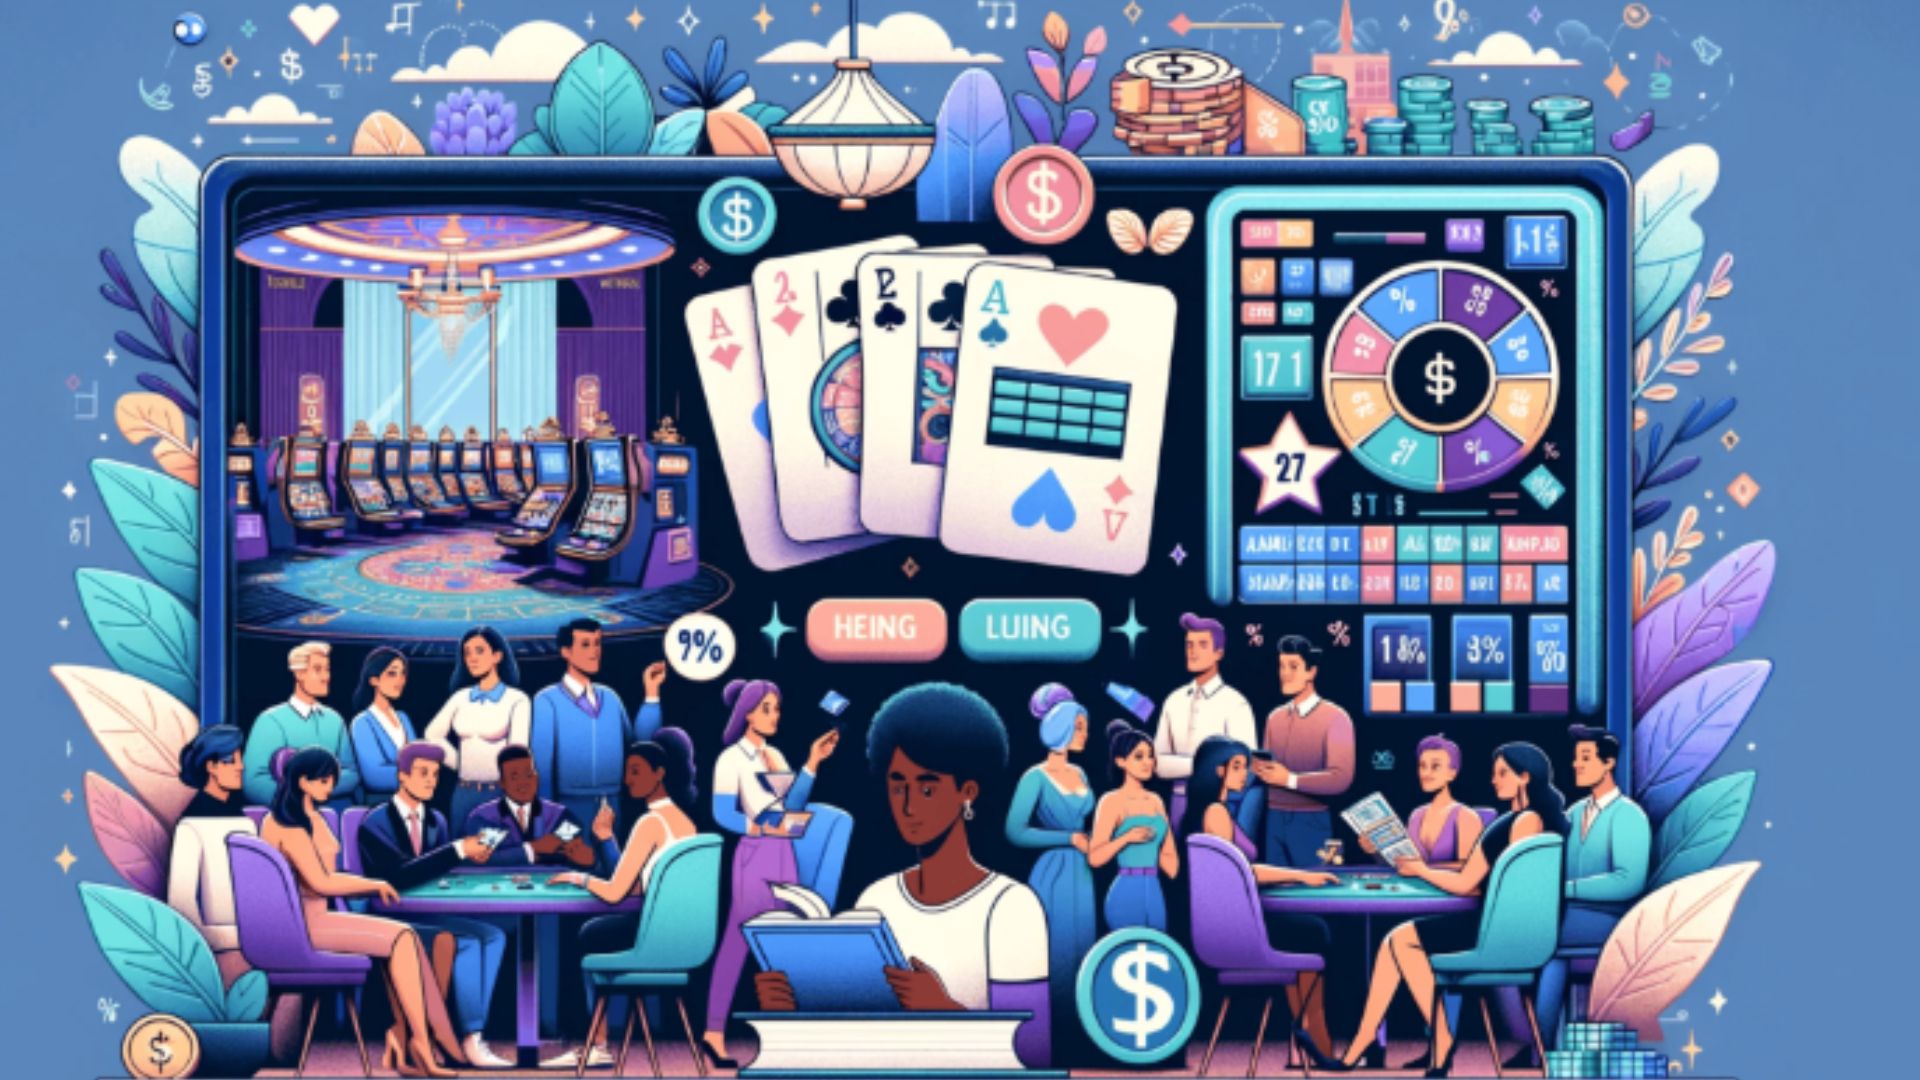 An Animated Picture of People Siiting on Tables and Cards 